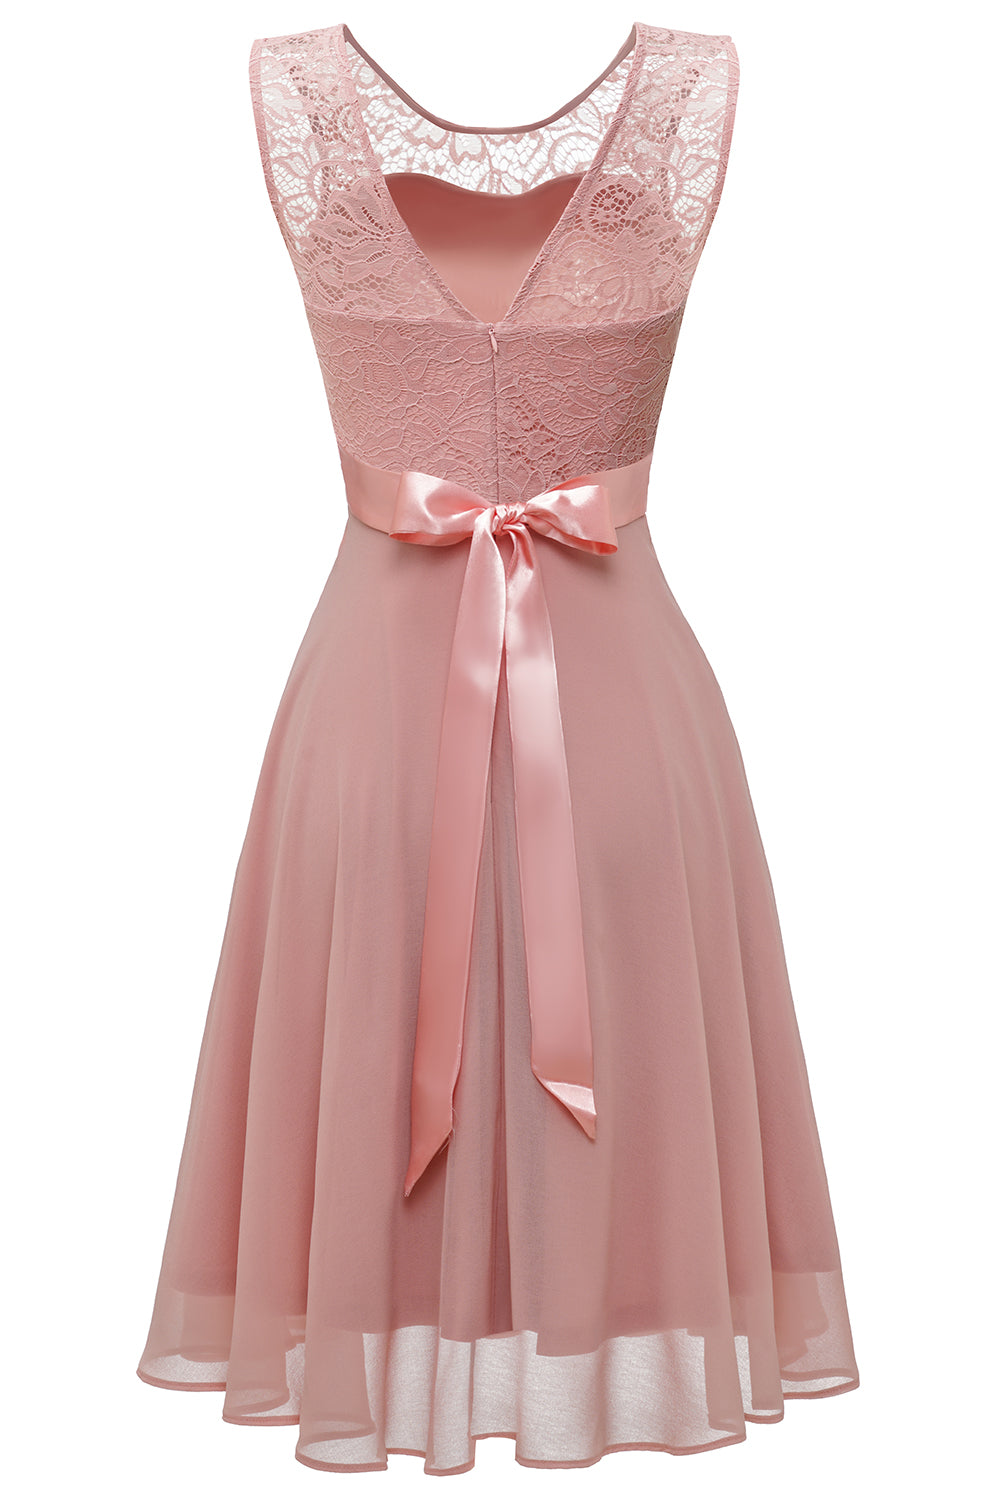 Blush Round Neck Lace Dress with Open Back